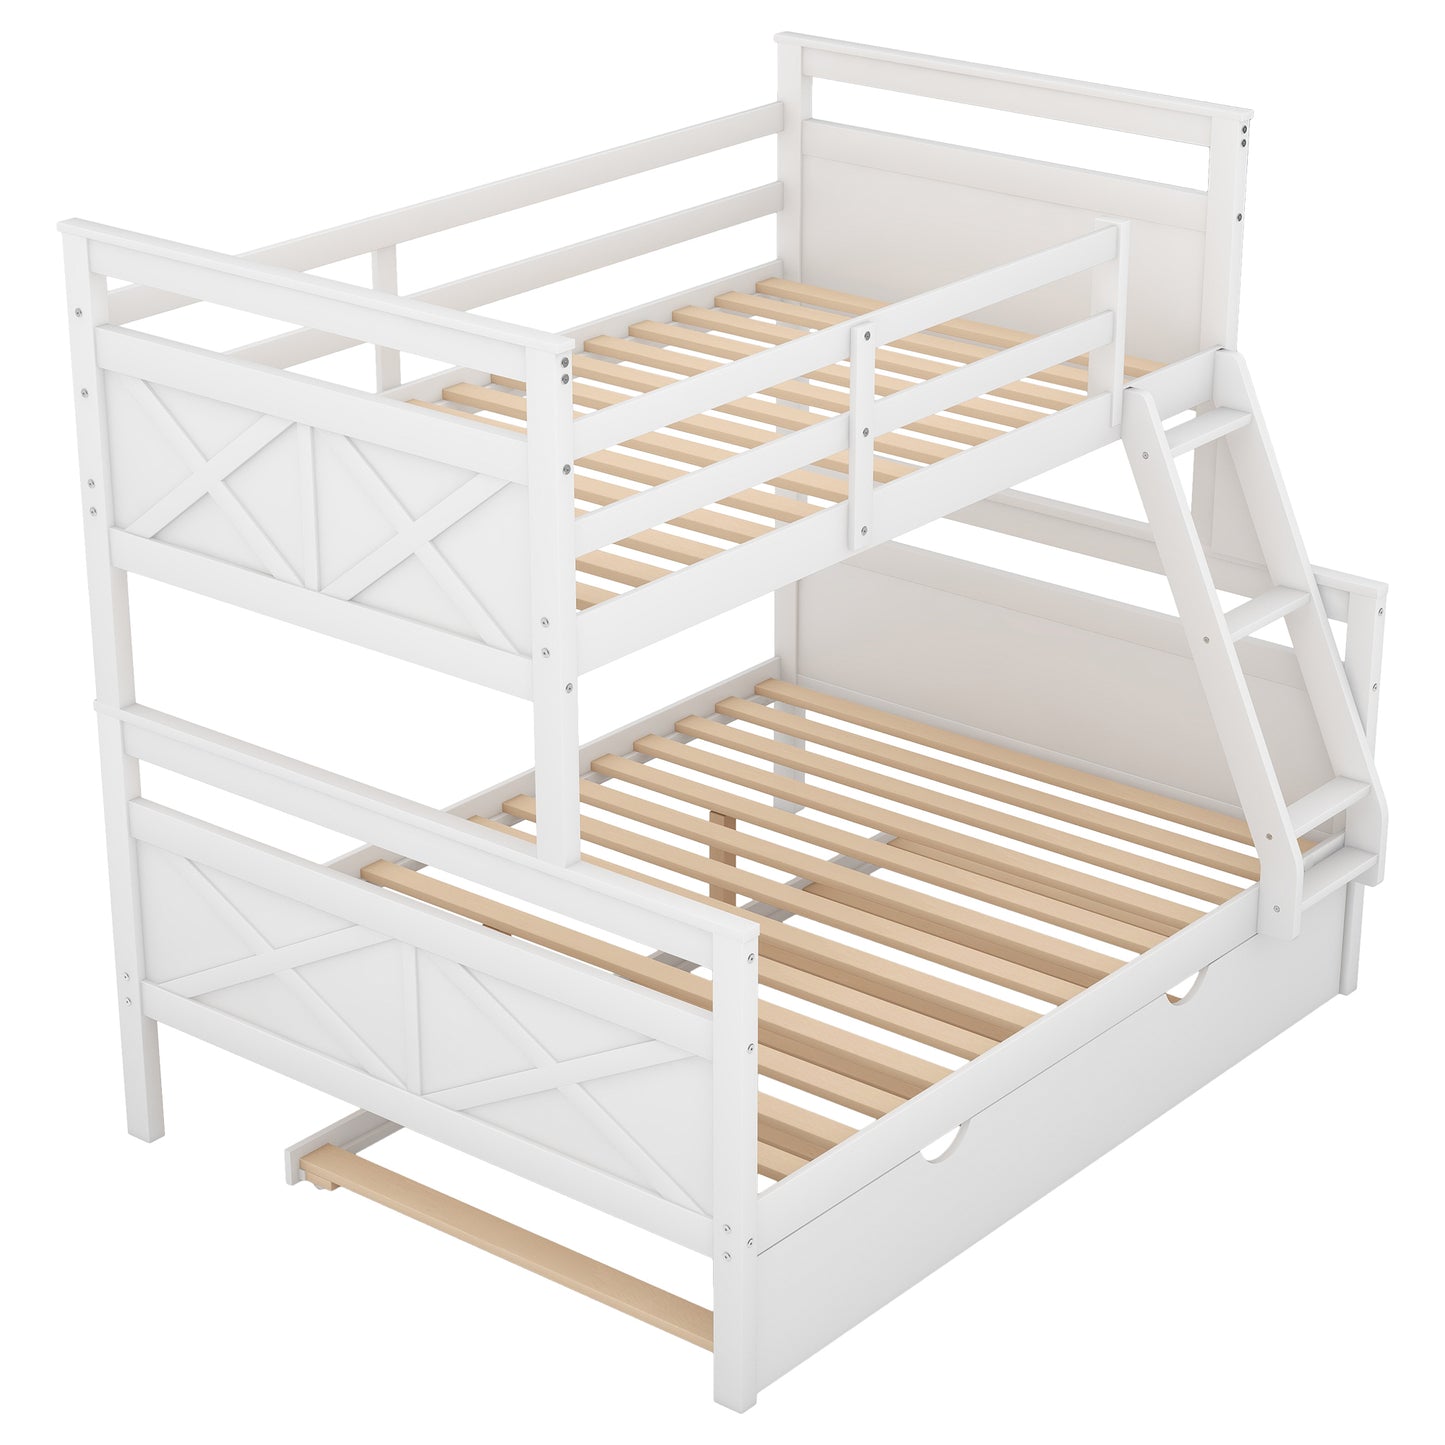 Twin over Full Bunk Bed with Ladder, Twin Size Trundle, Safety Guardrail, White